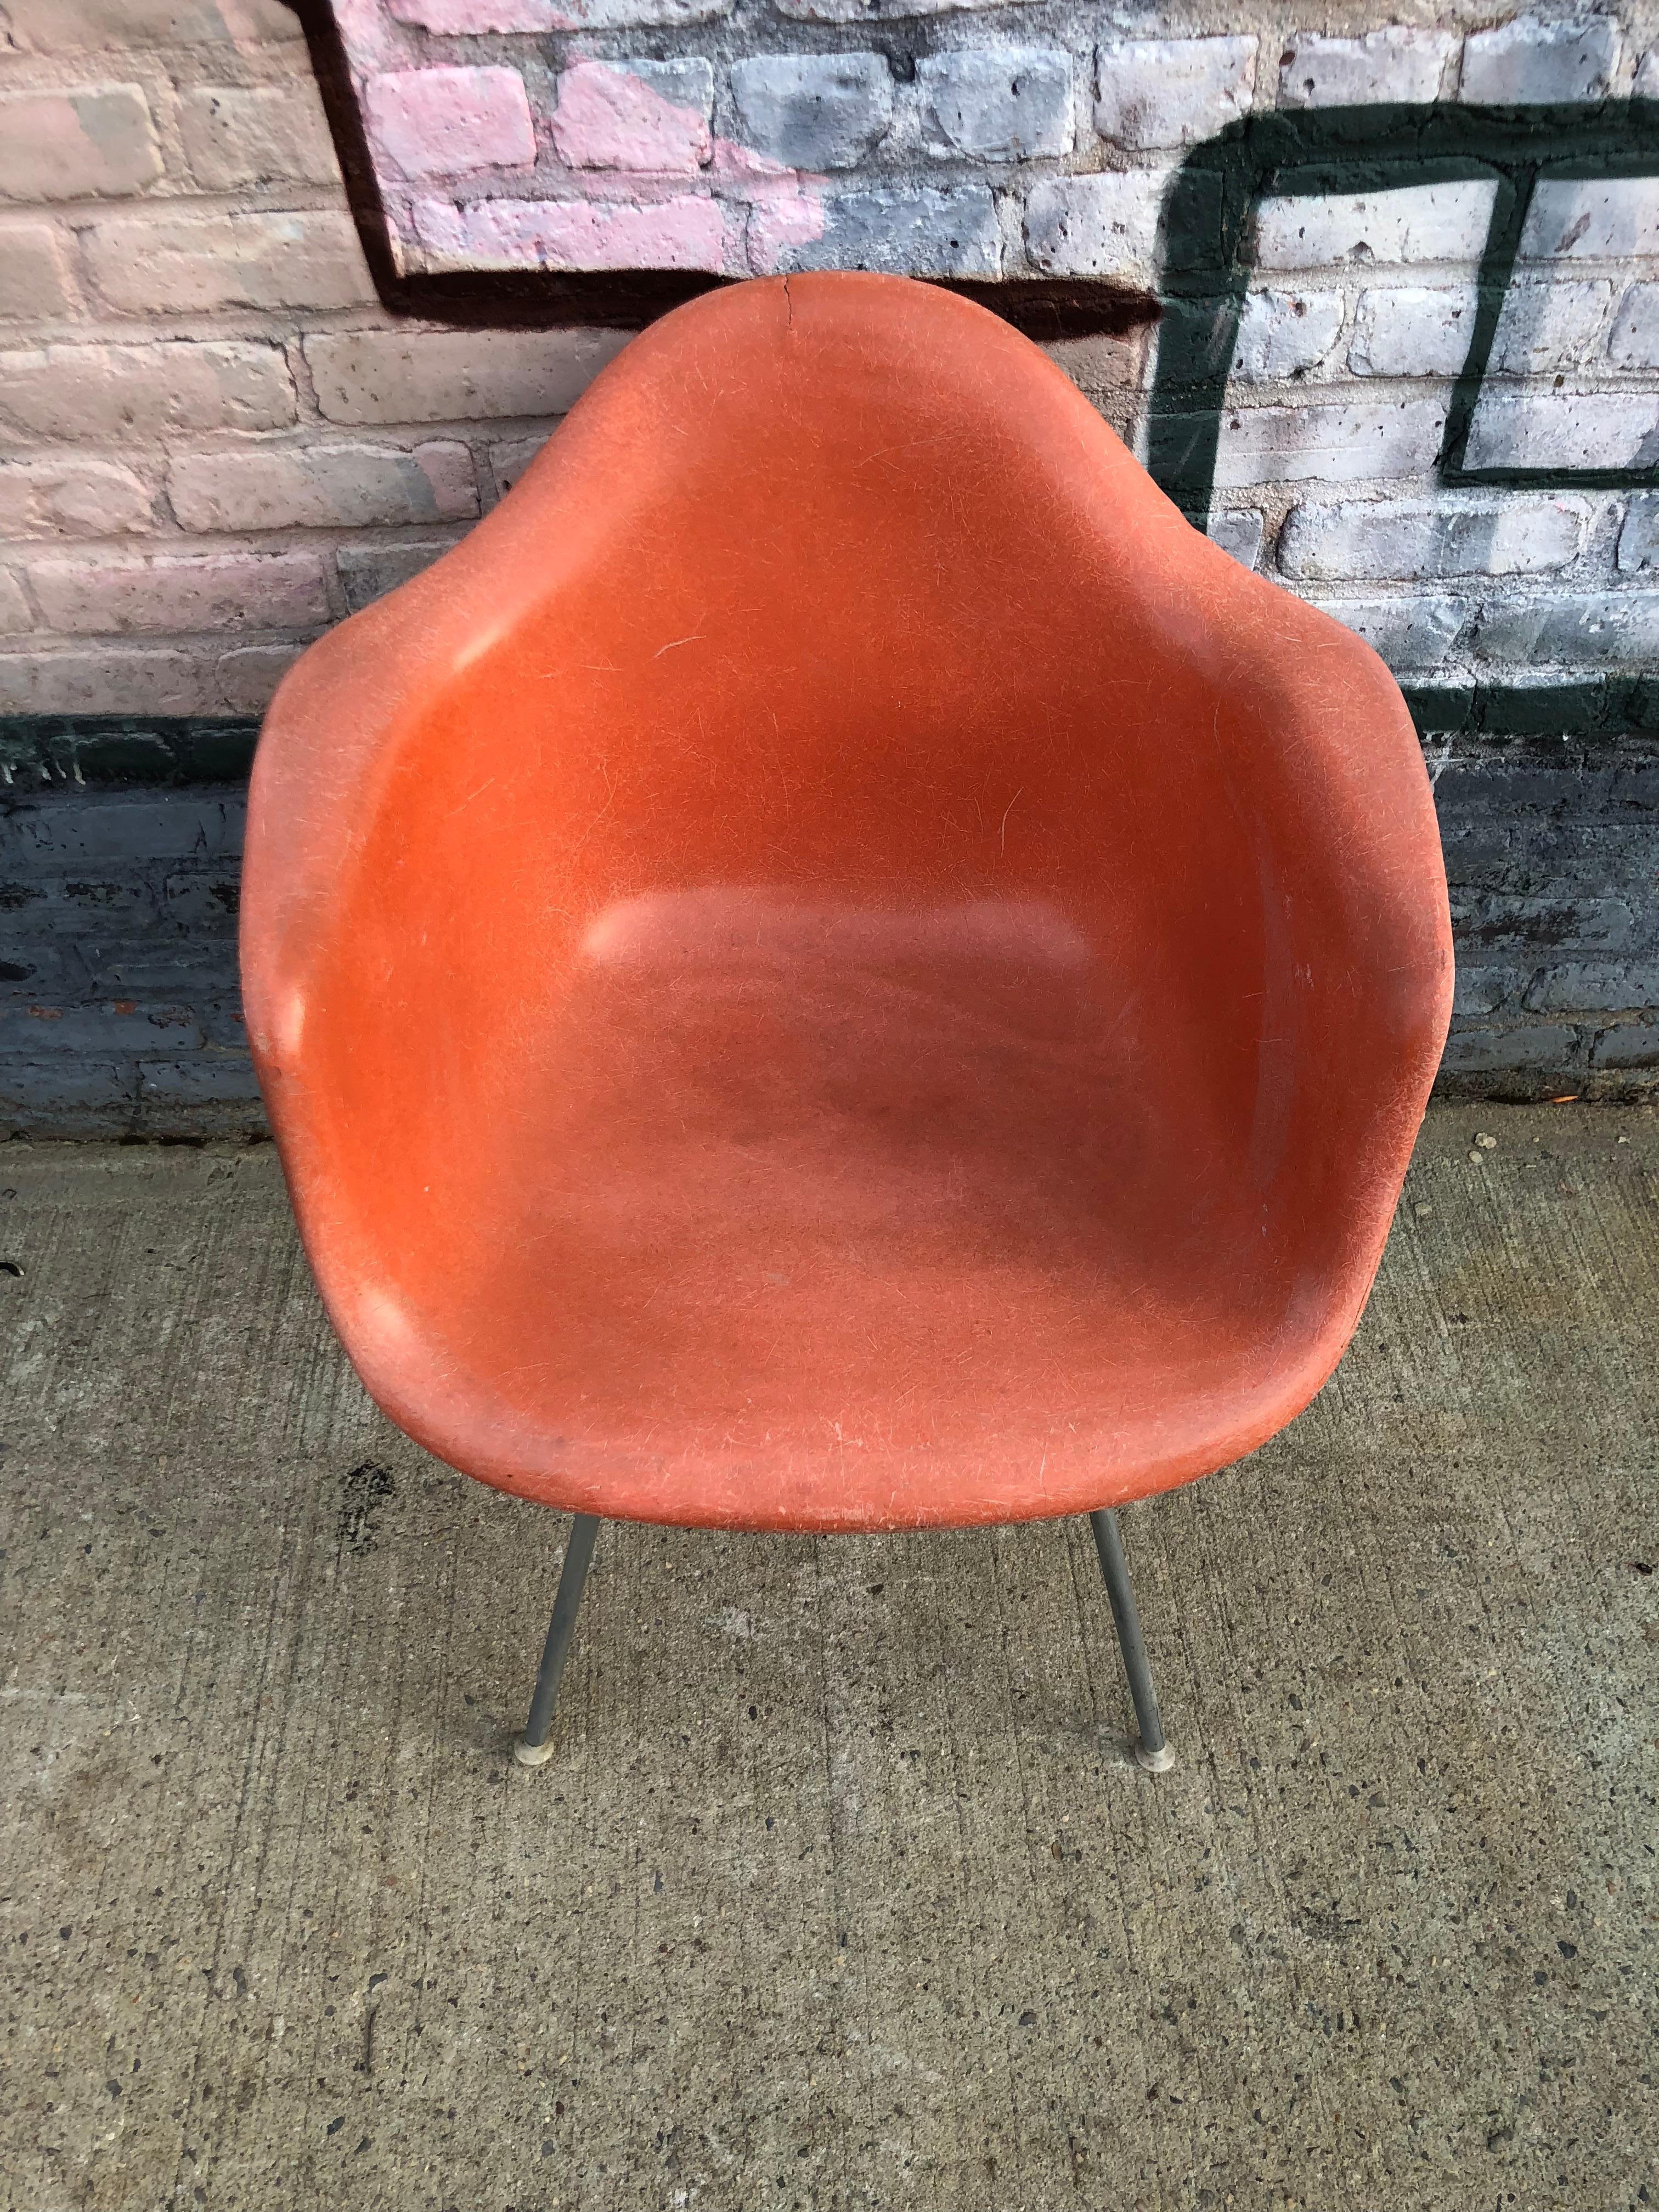 Vintage Herman Miller Eames fiberglass armchair in red orange. Embossed Herman Miller on authentic base. All mount and glides intact, circa 1960s.